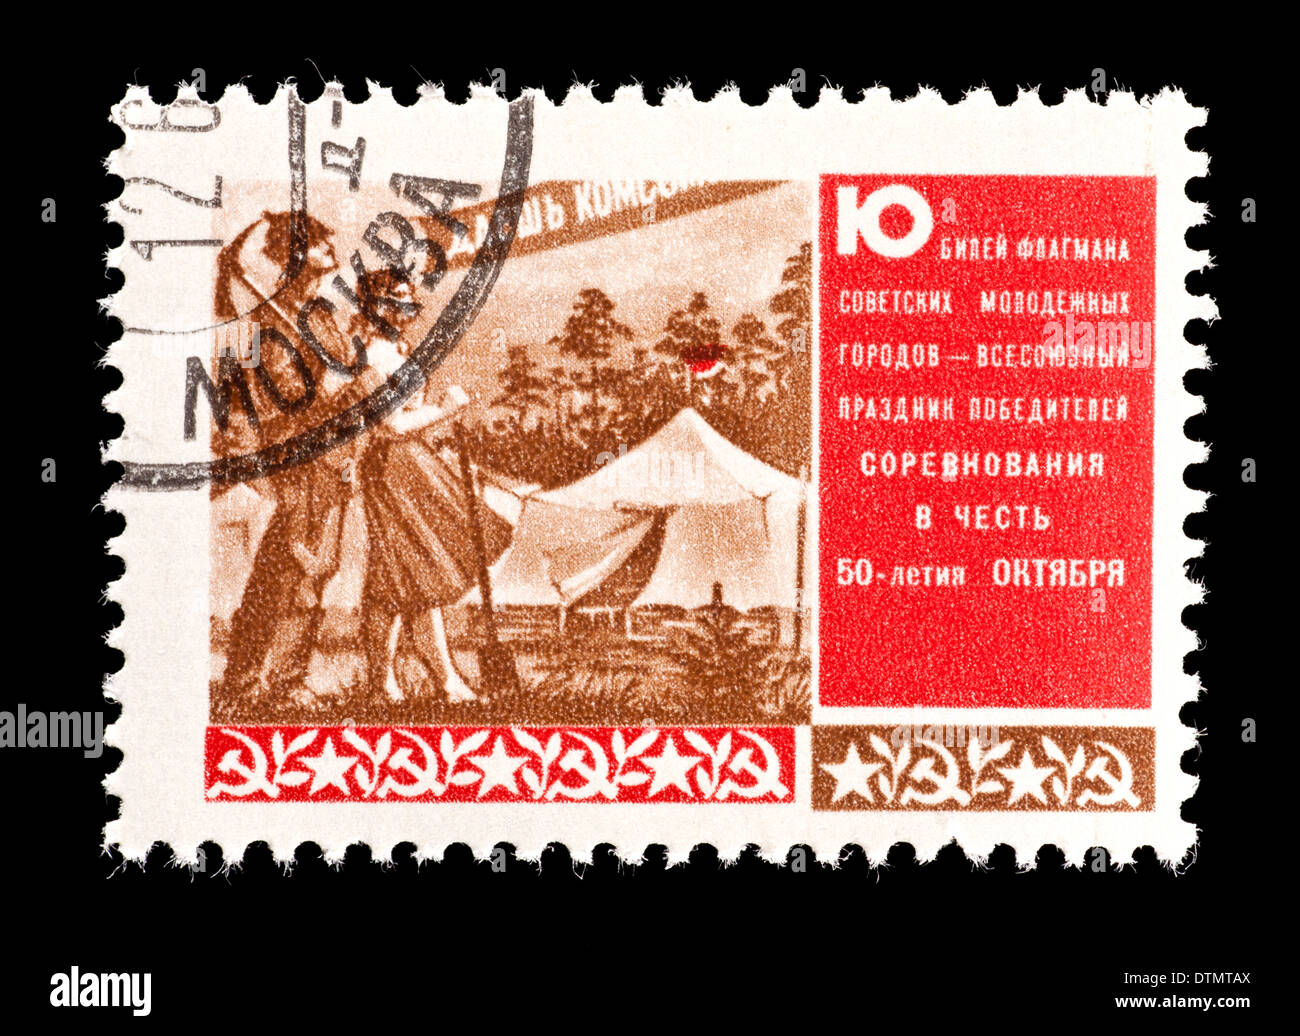 Postage stamp from the Soviet Union depicting Komsomolsk-on-Amur youth town, 35'th anniversary Stock Photo